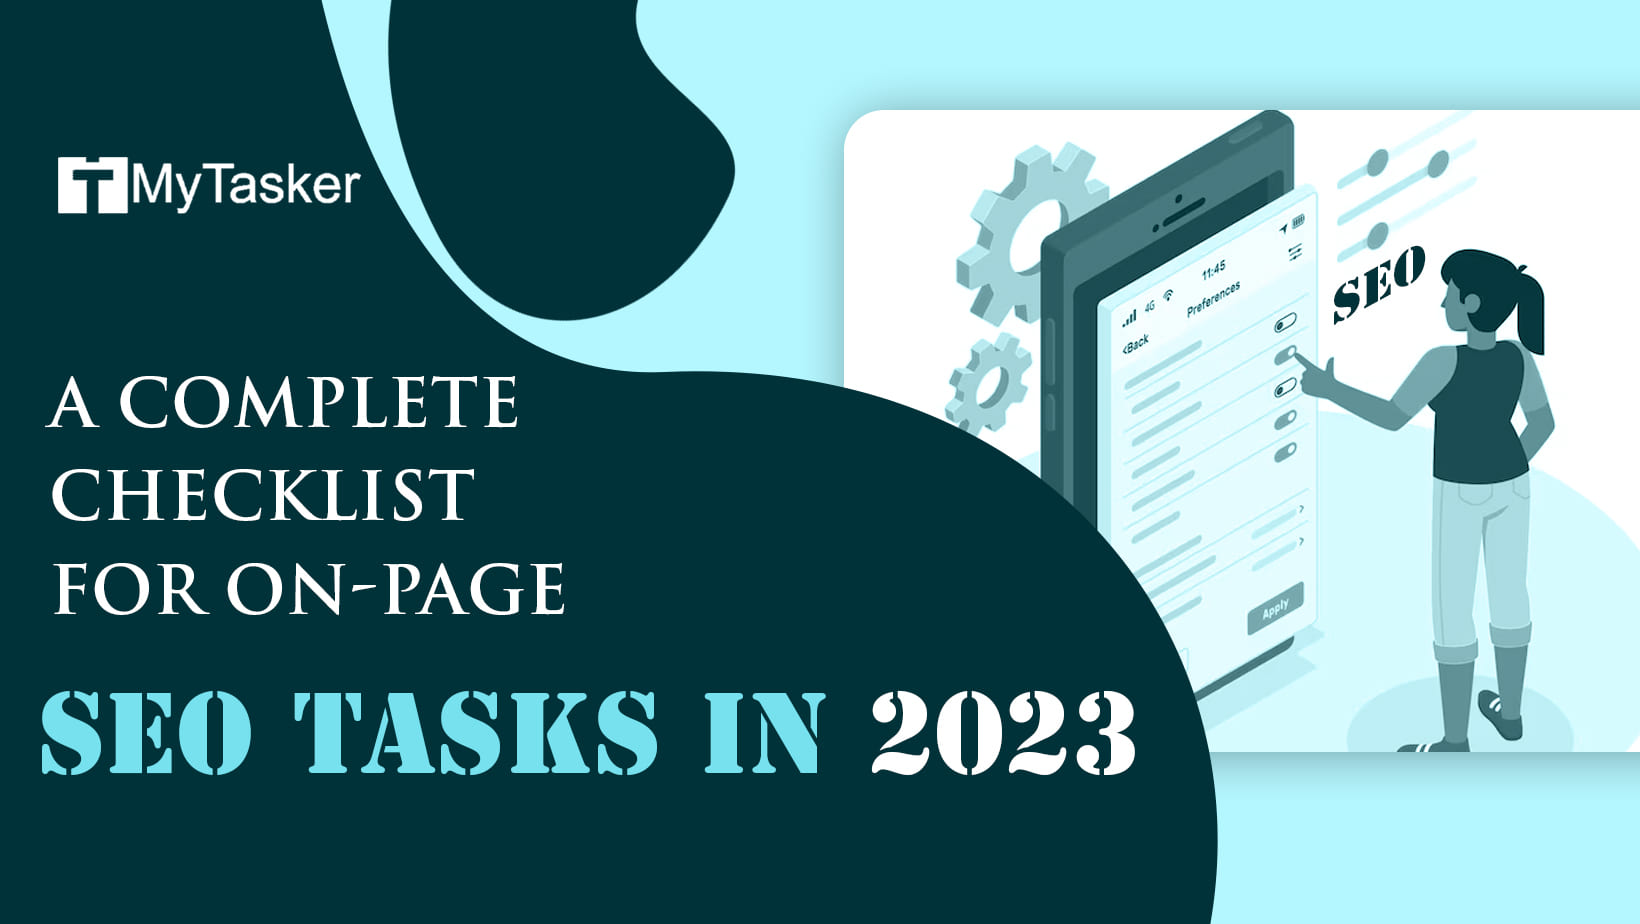 A Complete Checklist for On-Page SEO Tasks in 2023